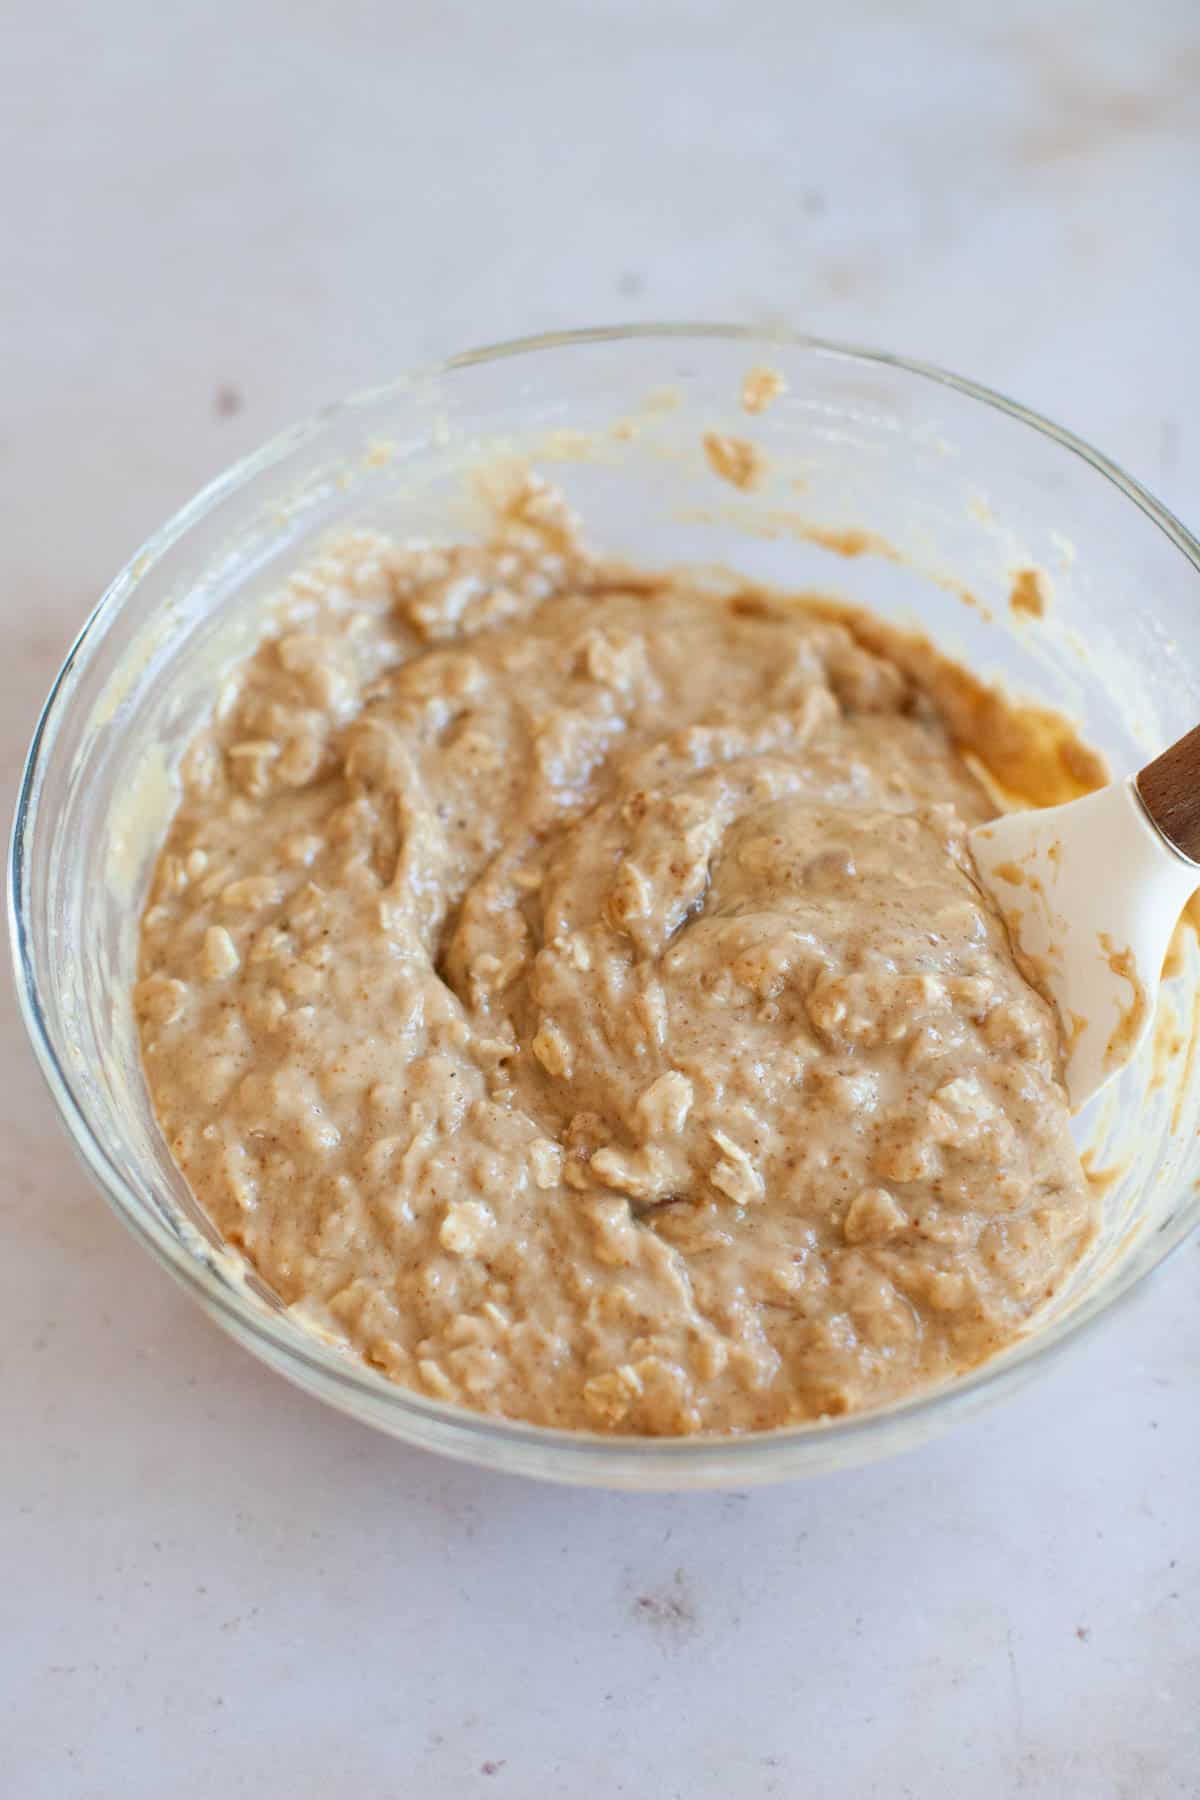 Dairy free muffin batter, mixed together in a glass bowl.